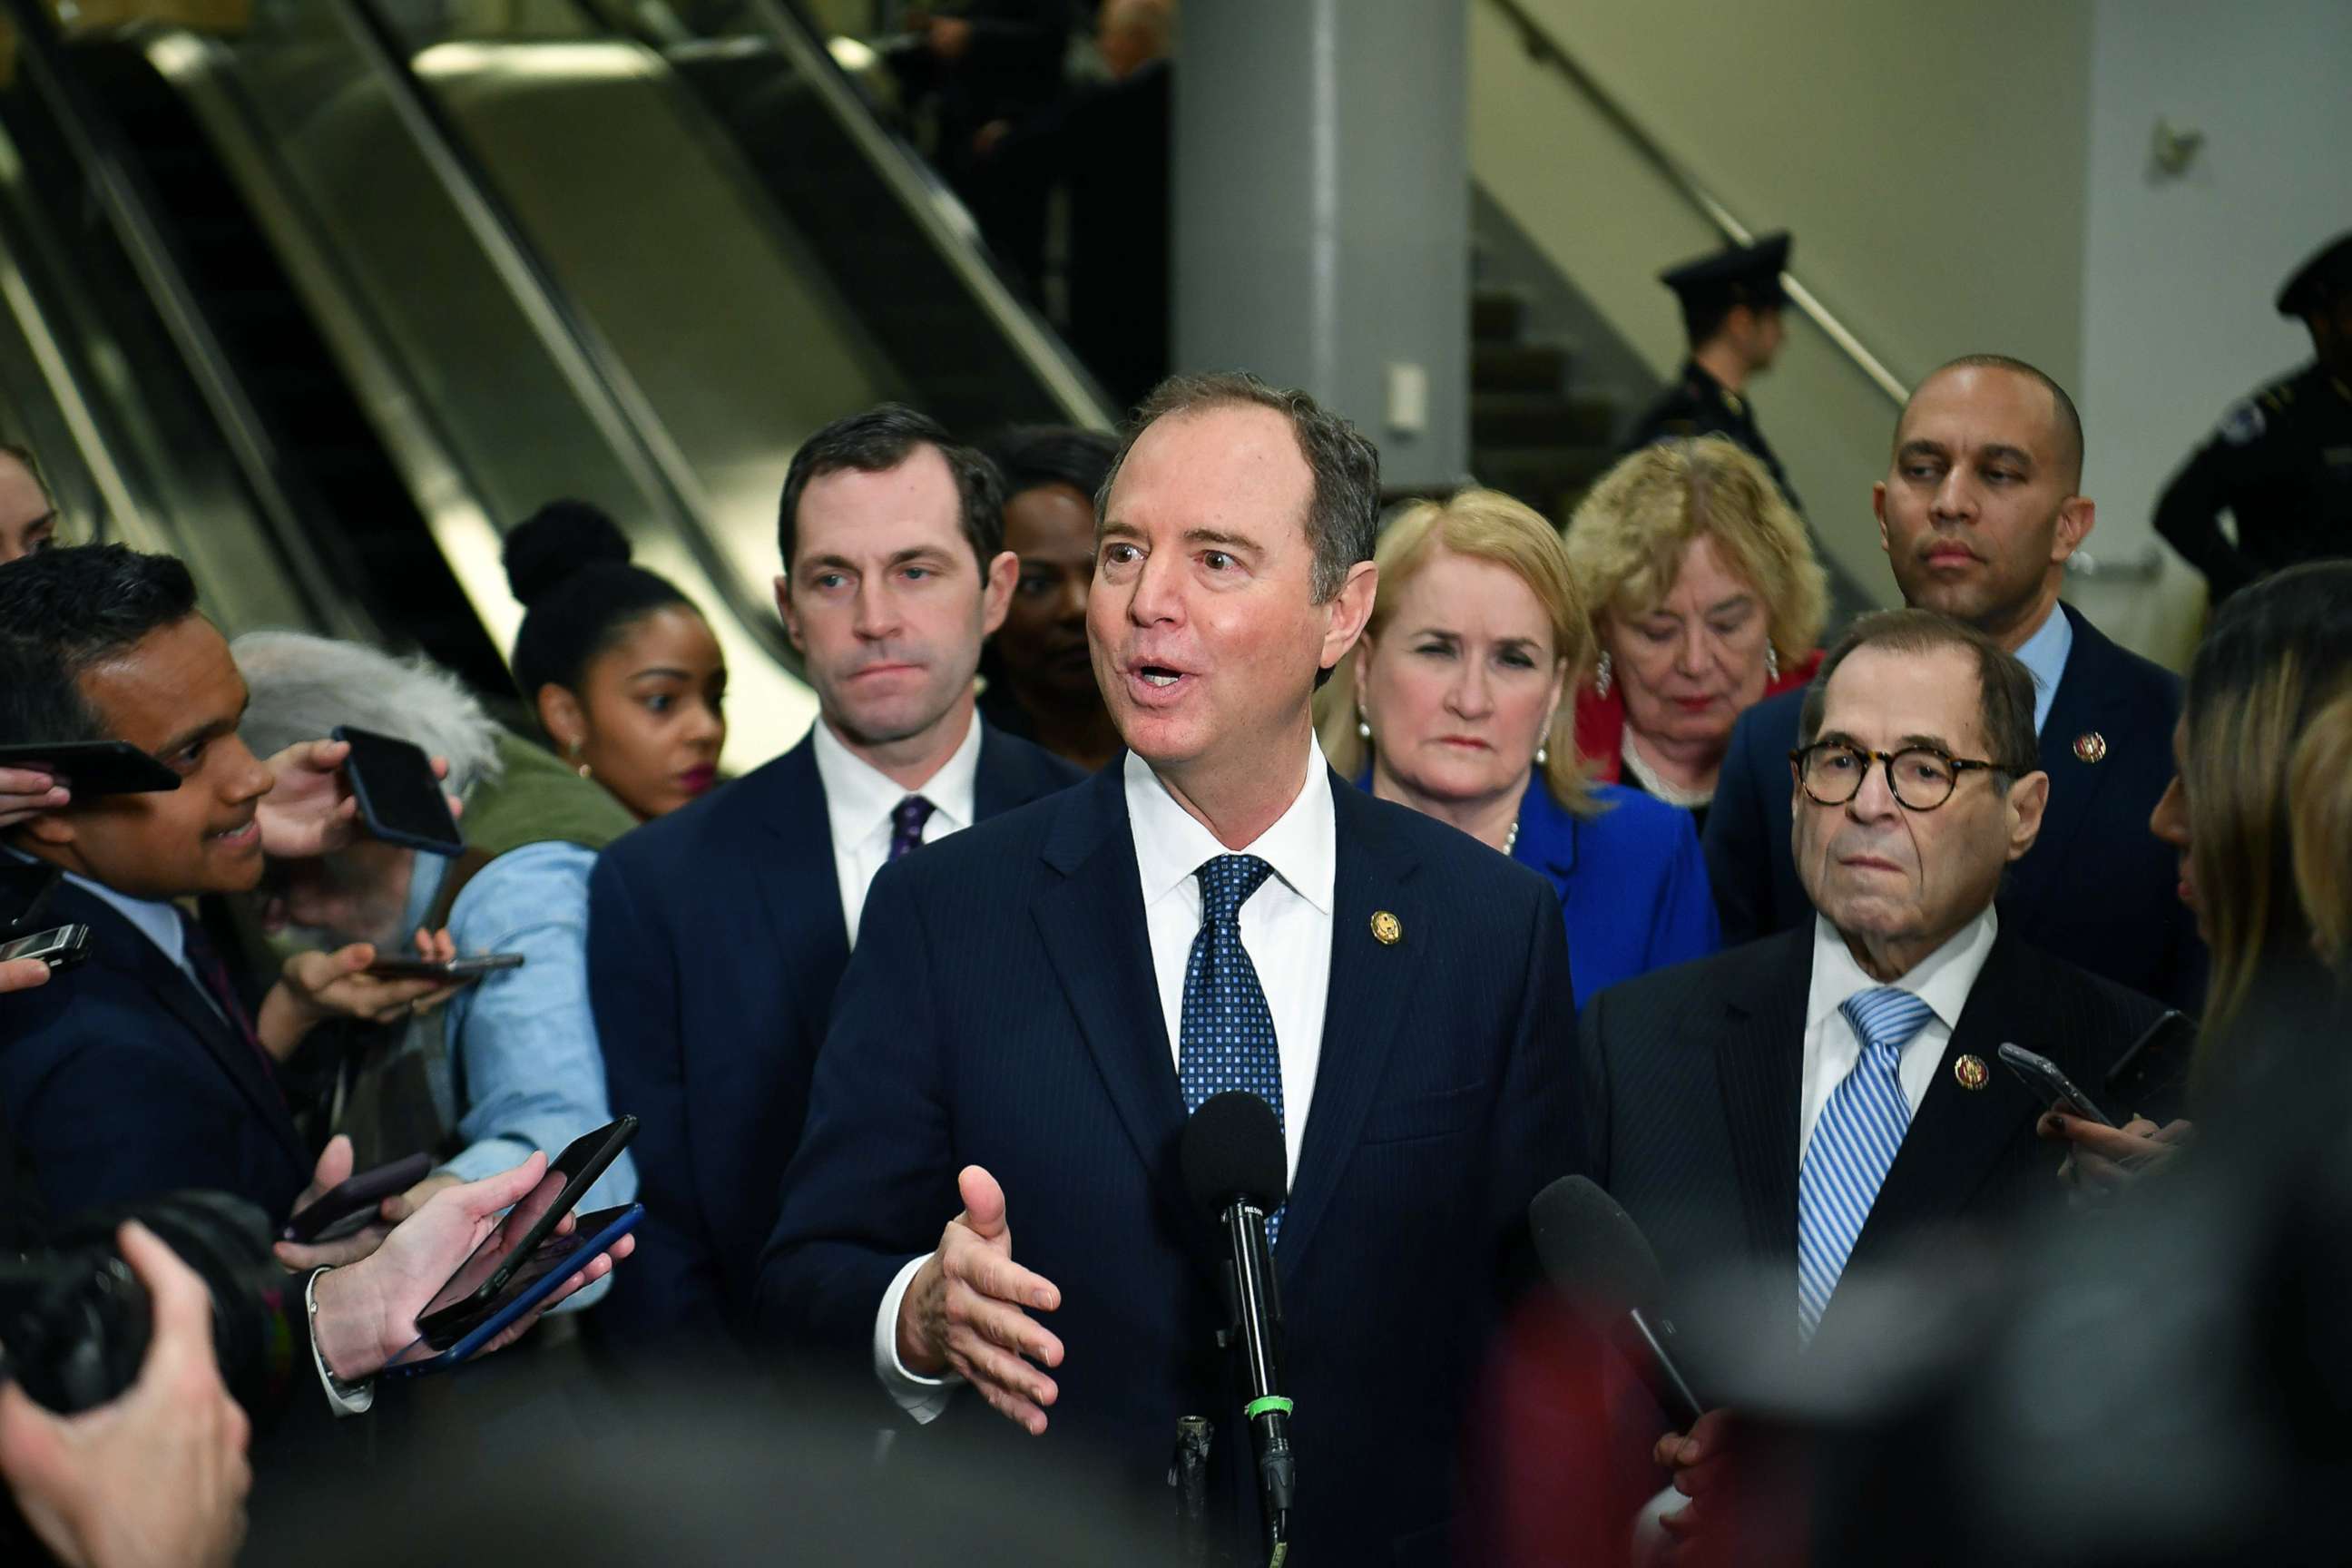 PHOTO: Lead House Manager Adam Schiff speaks to the press at the Capitol in Washington, D.C., Jan. 22, 2020.